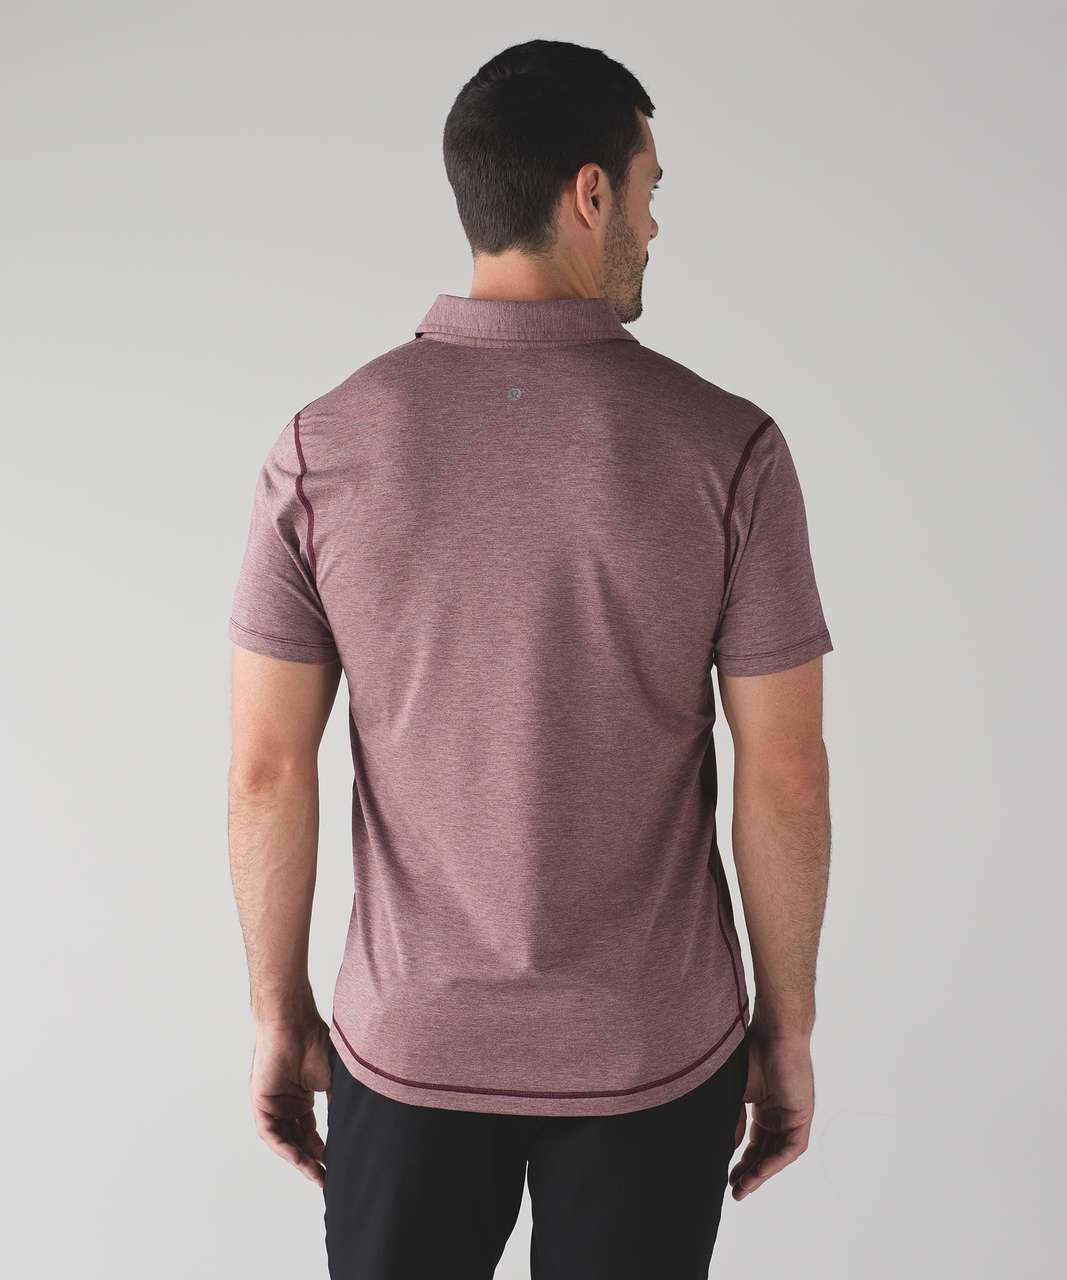 Lululemon Evolution Polo - Heathered Cassis (First Release)